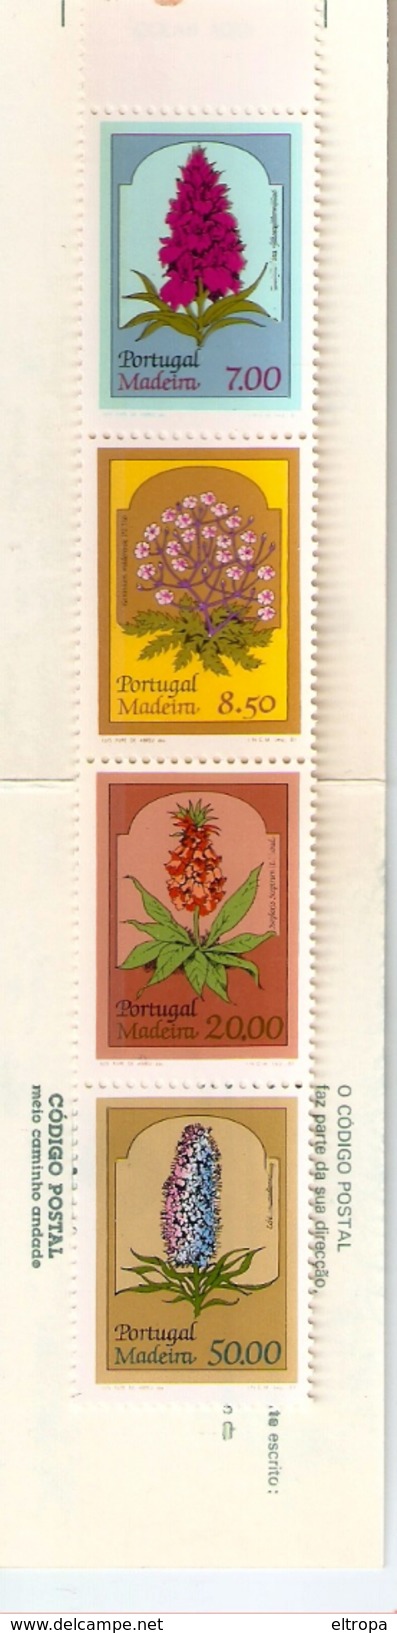 PORTUGAL 1981 Madeira Flowers Mint Complete Stamp Booklet - Libretti